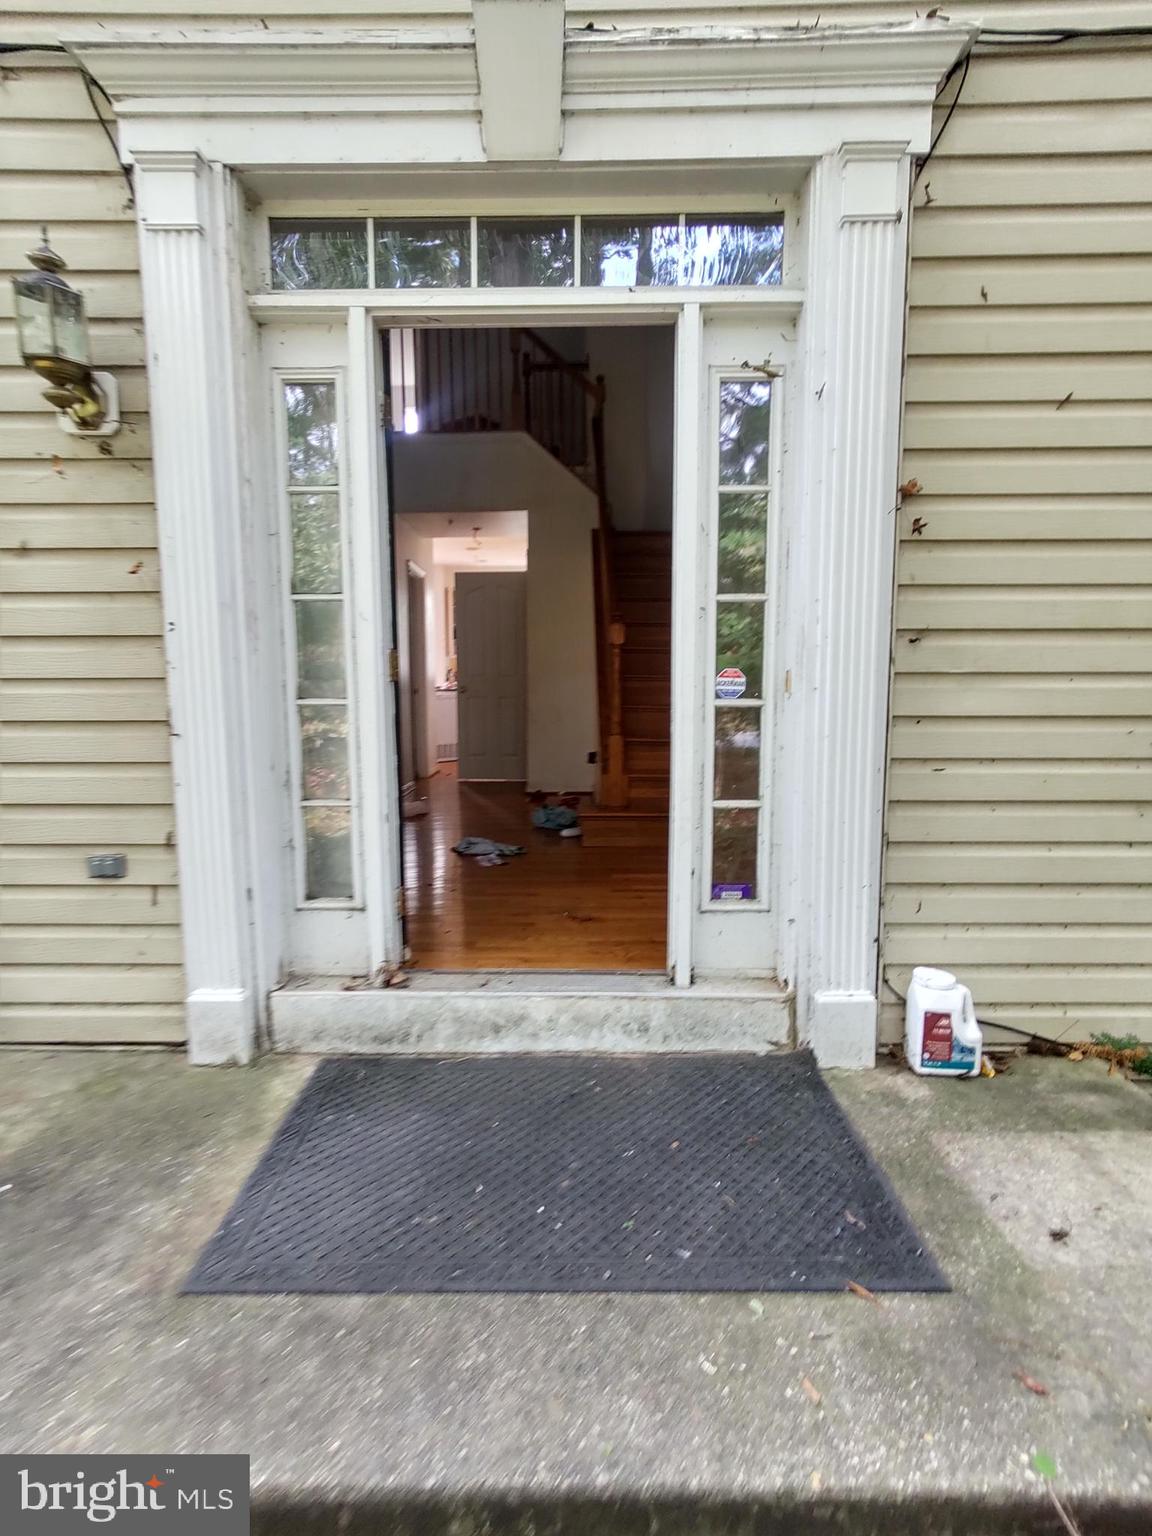 a view of a front door of the house